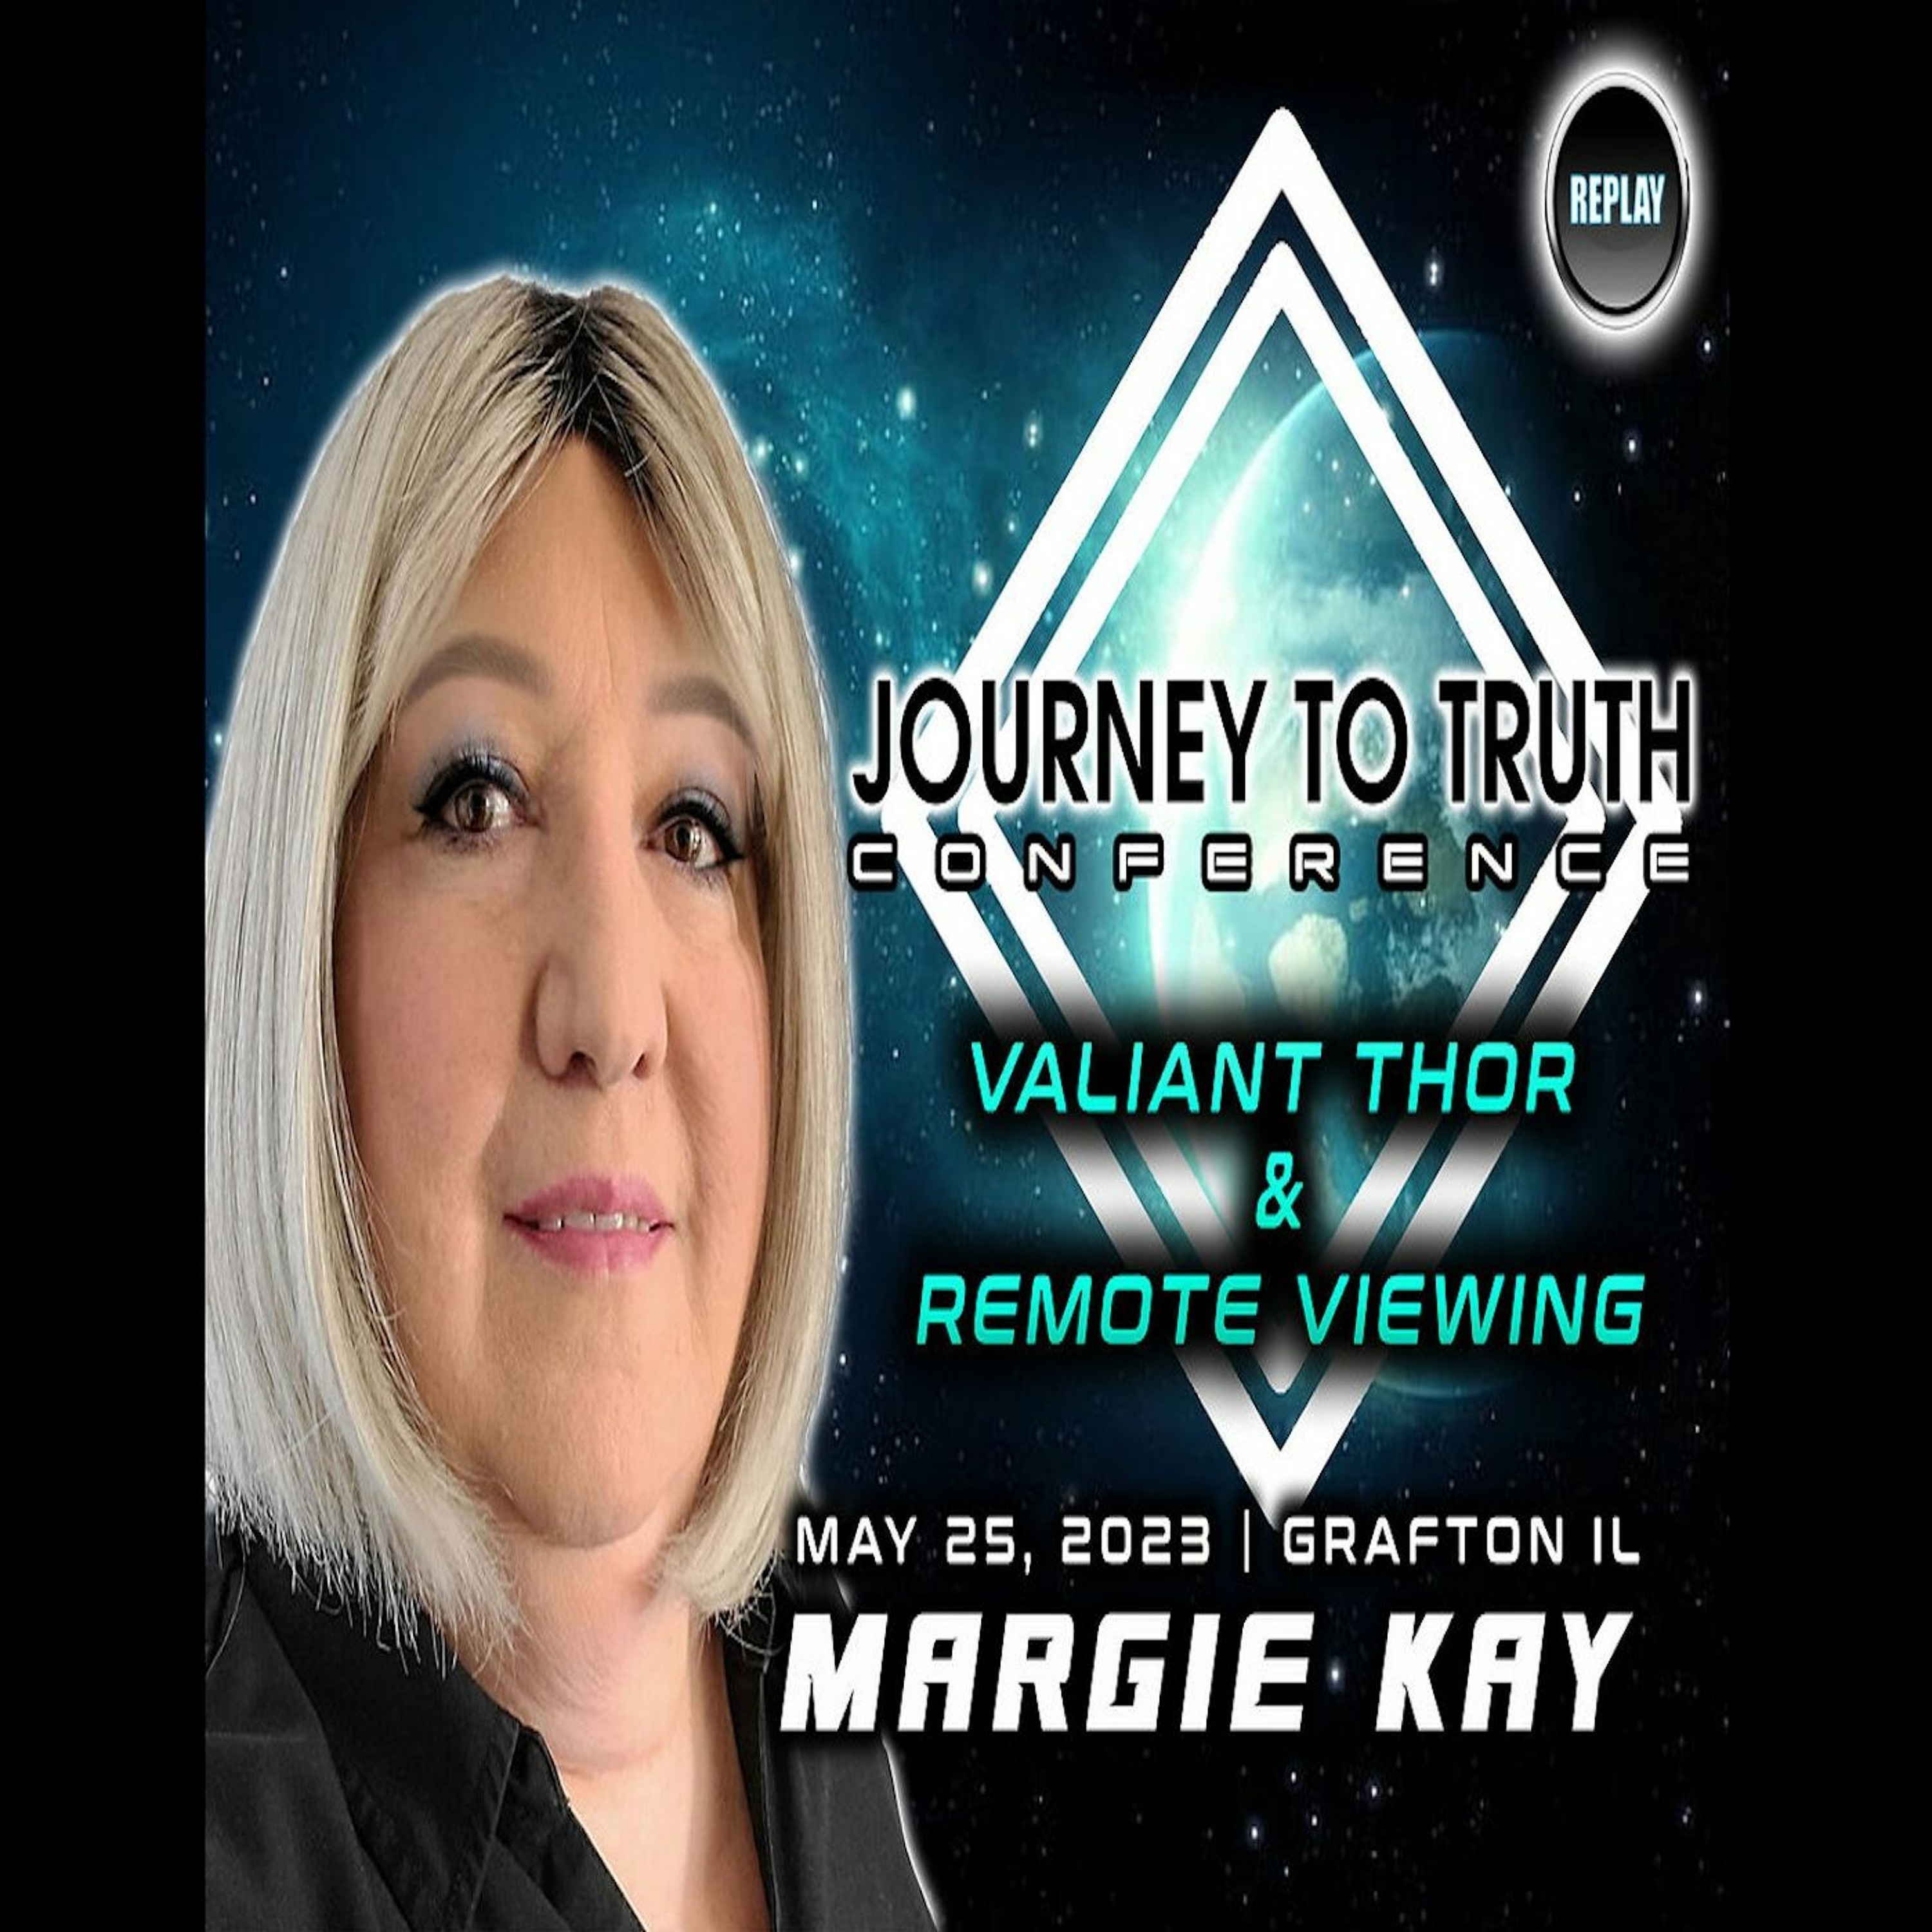 MARGIE KAY | VALIANT THOR & REMOTE VIEWING | A MUST SEE! - J2T CON 2023